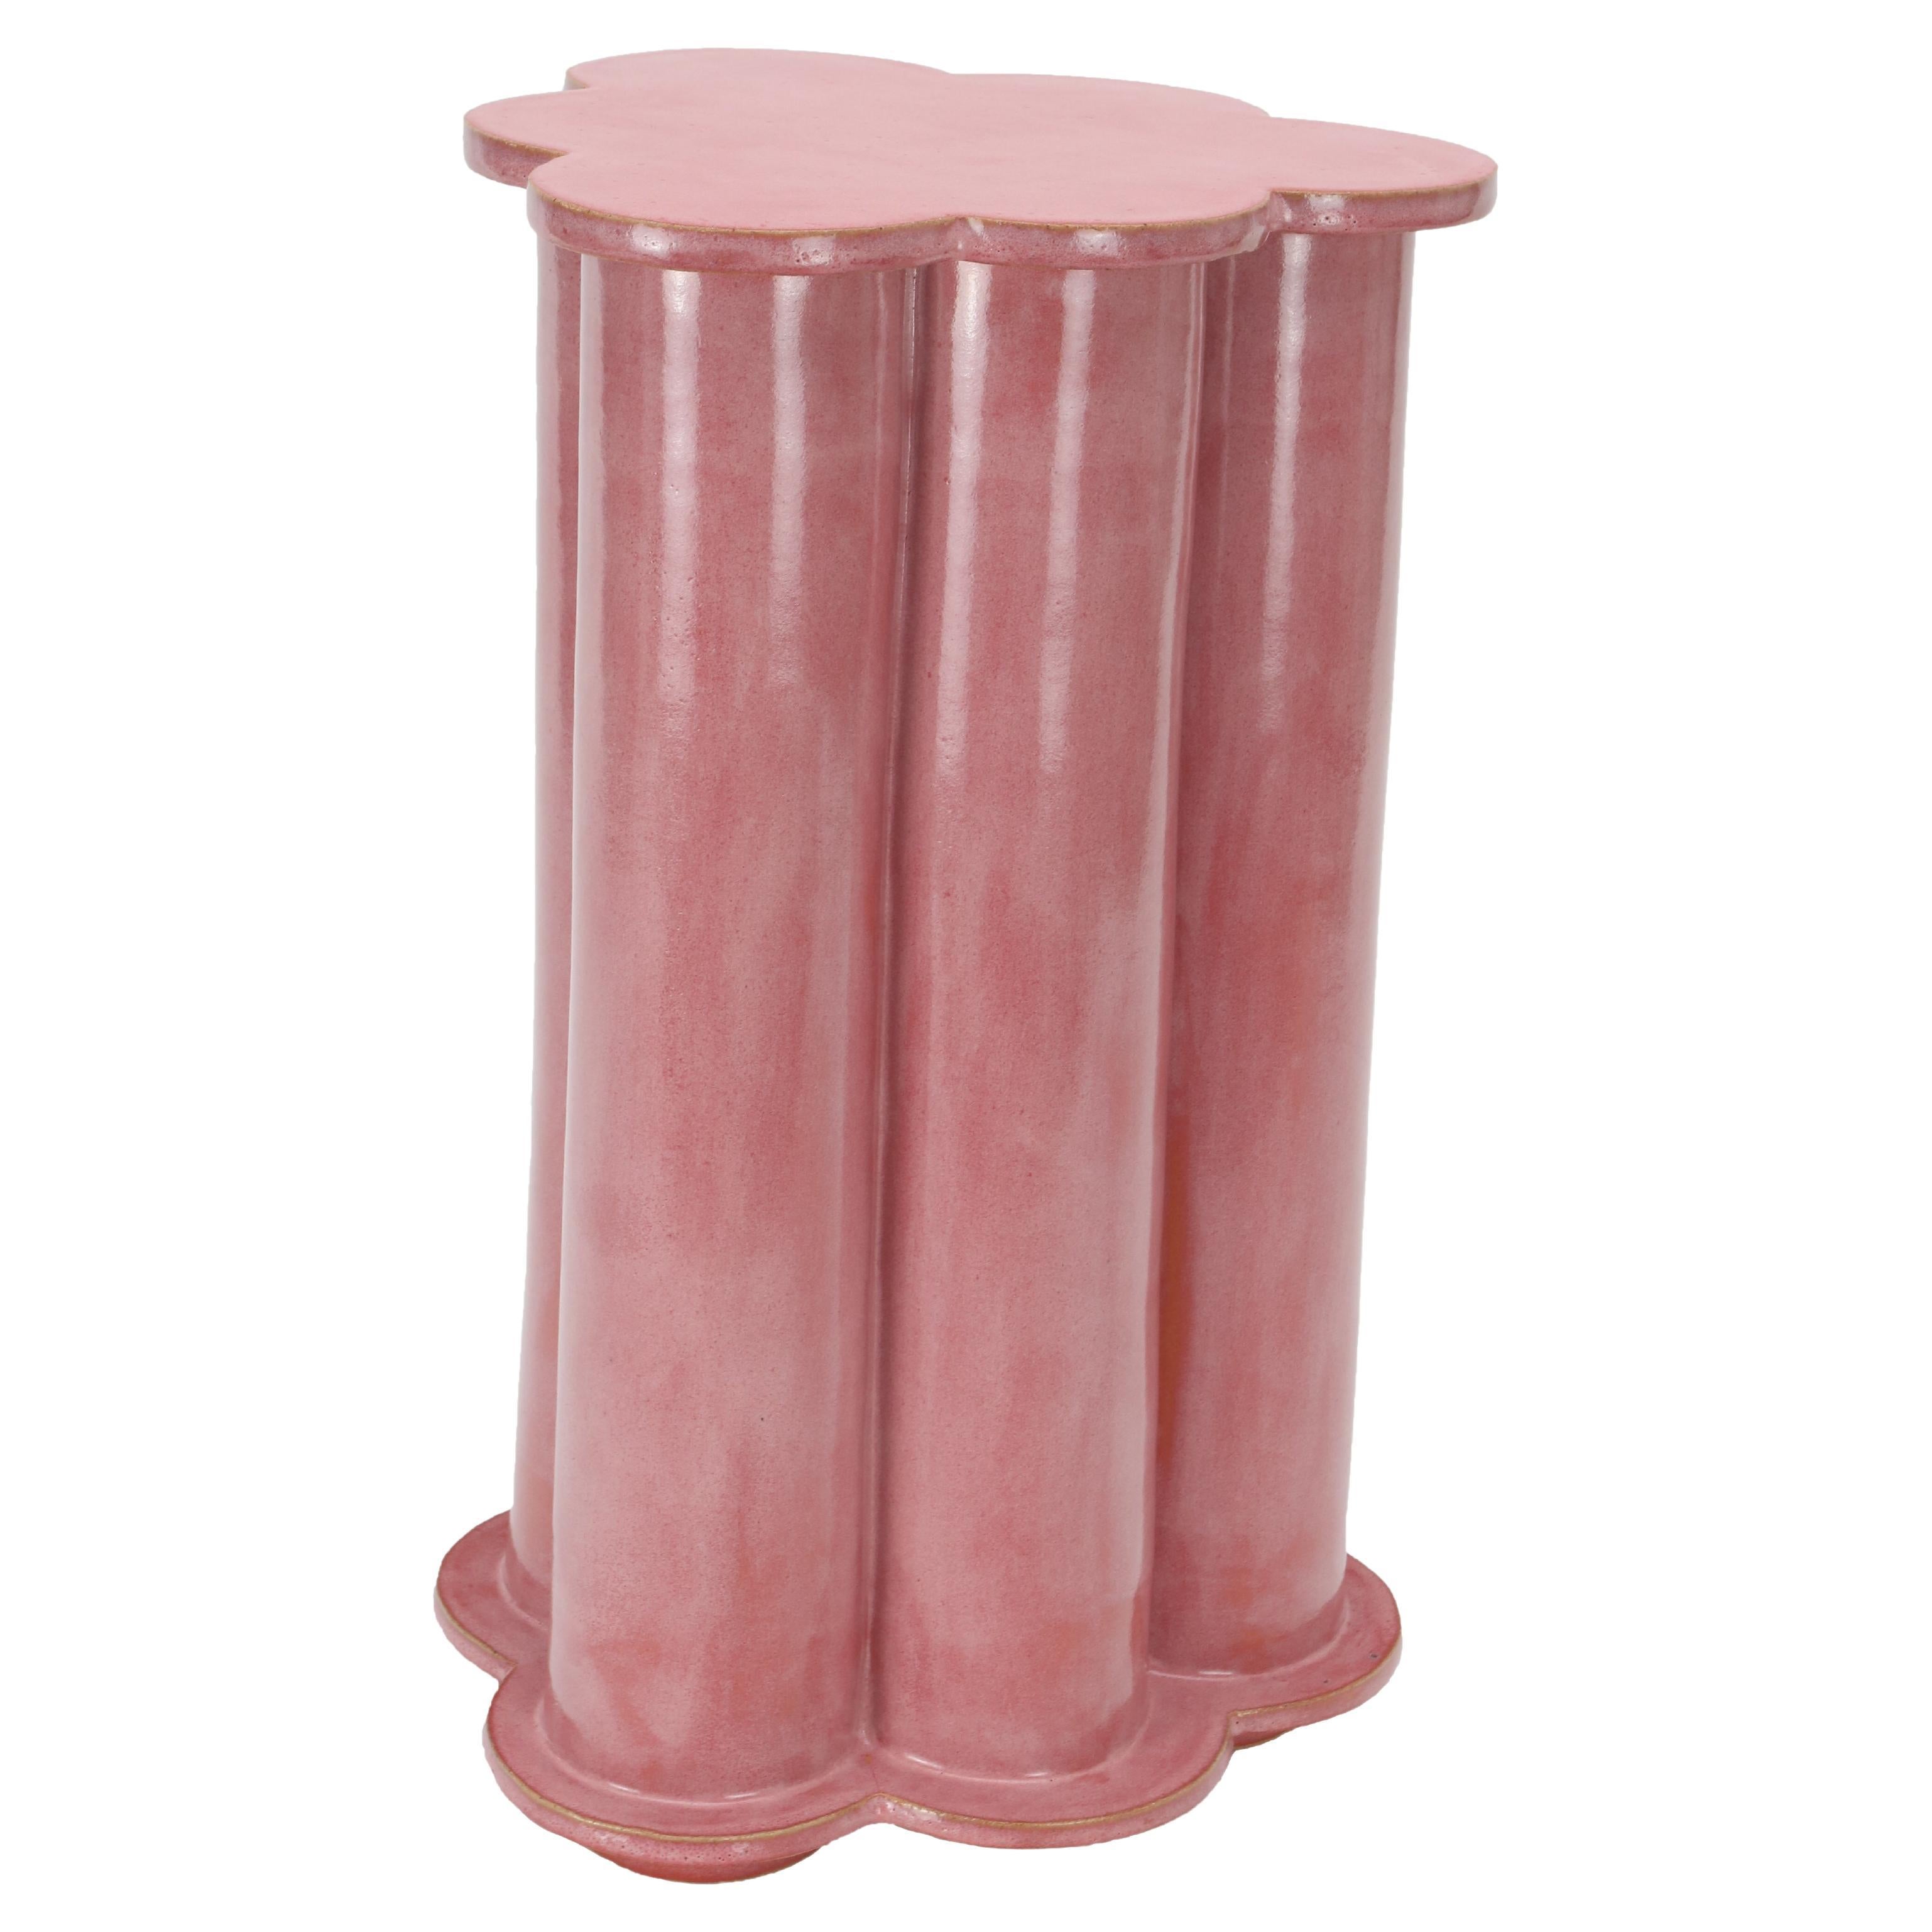 Tall Ruffle Ceramic Side Table & Stool in Sunset Pink by Bzippy